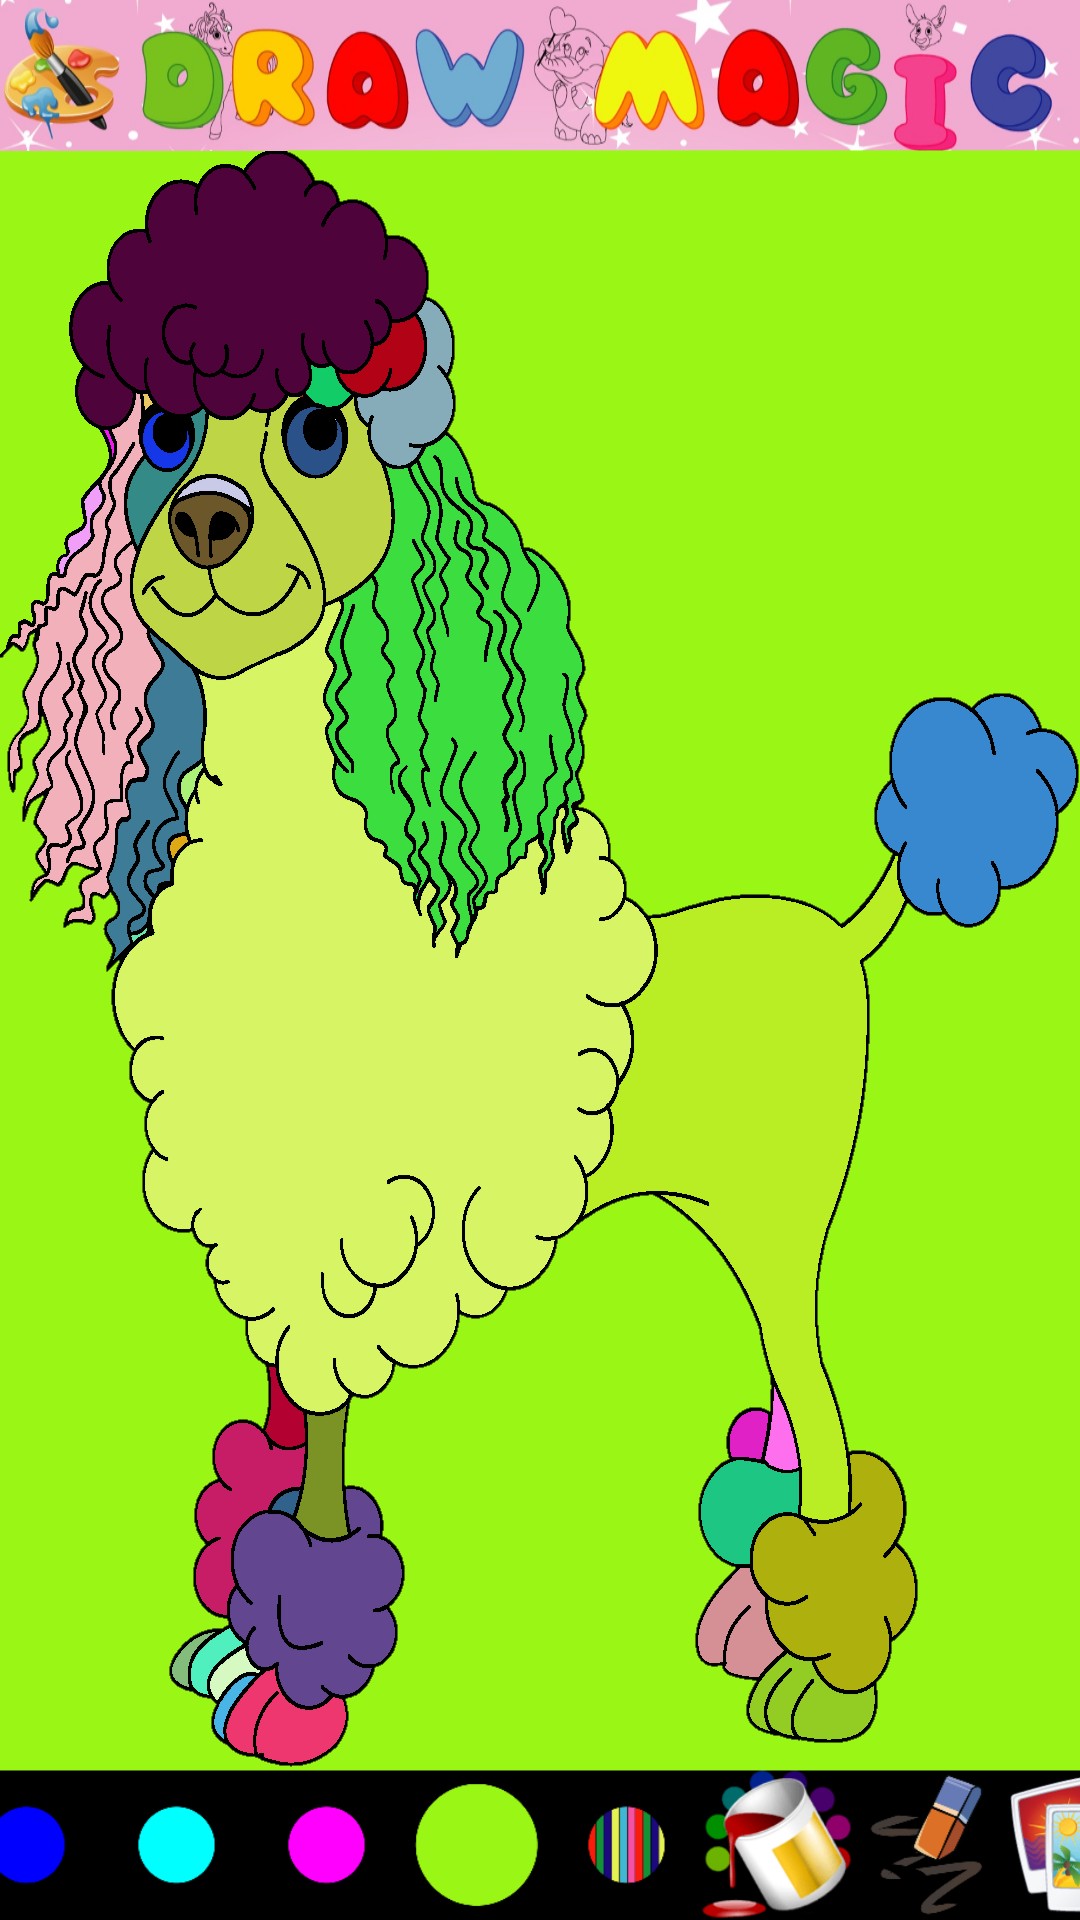 Coloring Pages for kids 2